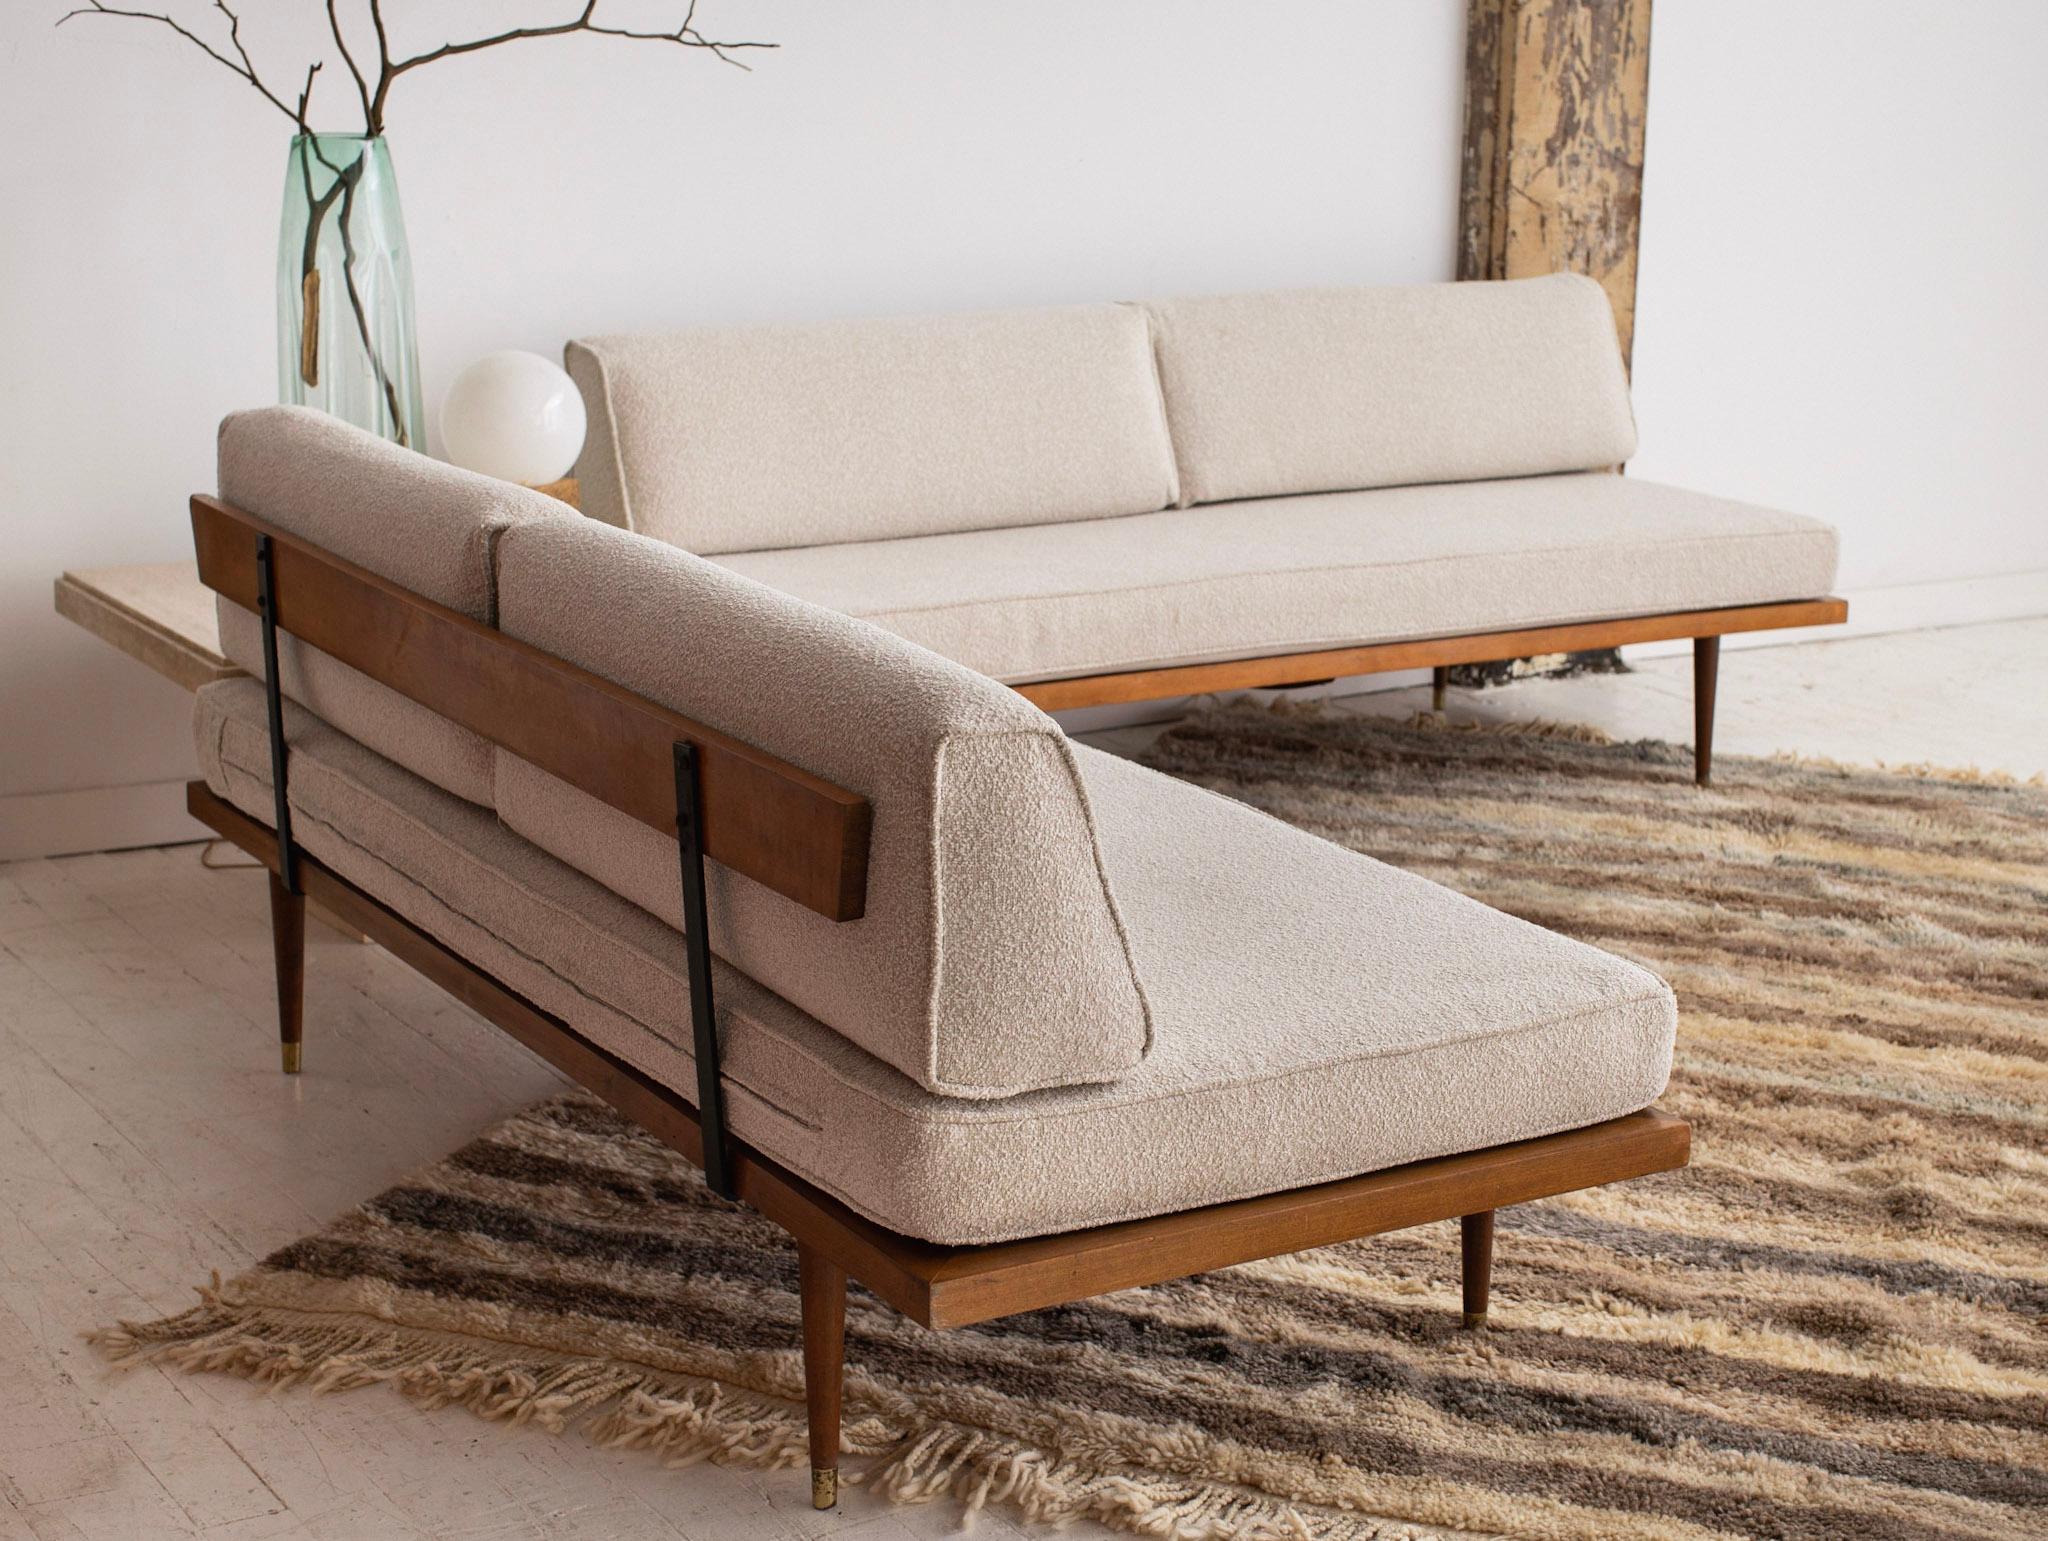 Mid-Century Modern Day Bed in Textured Cream Upholstery 3